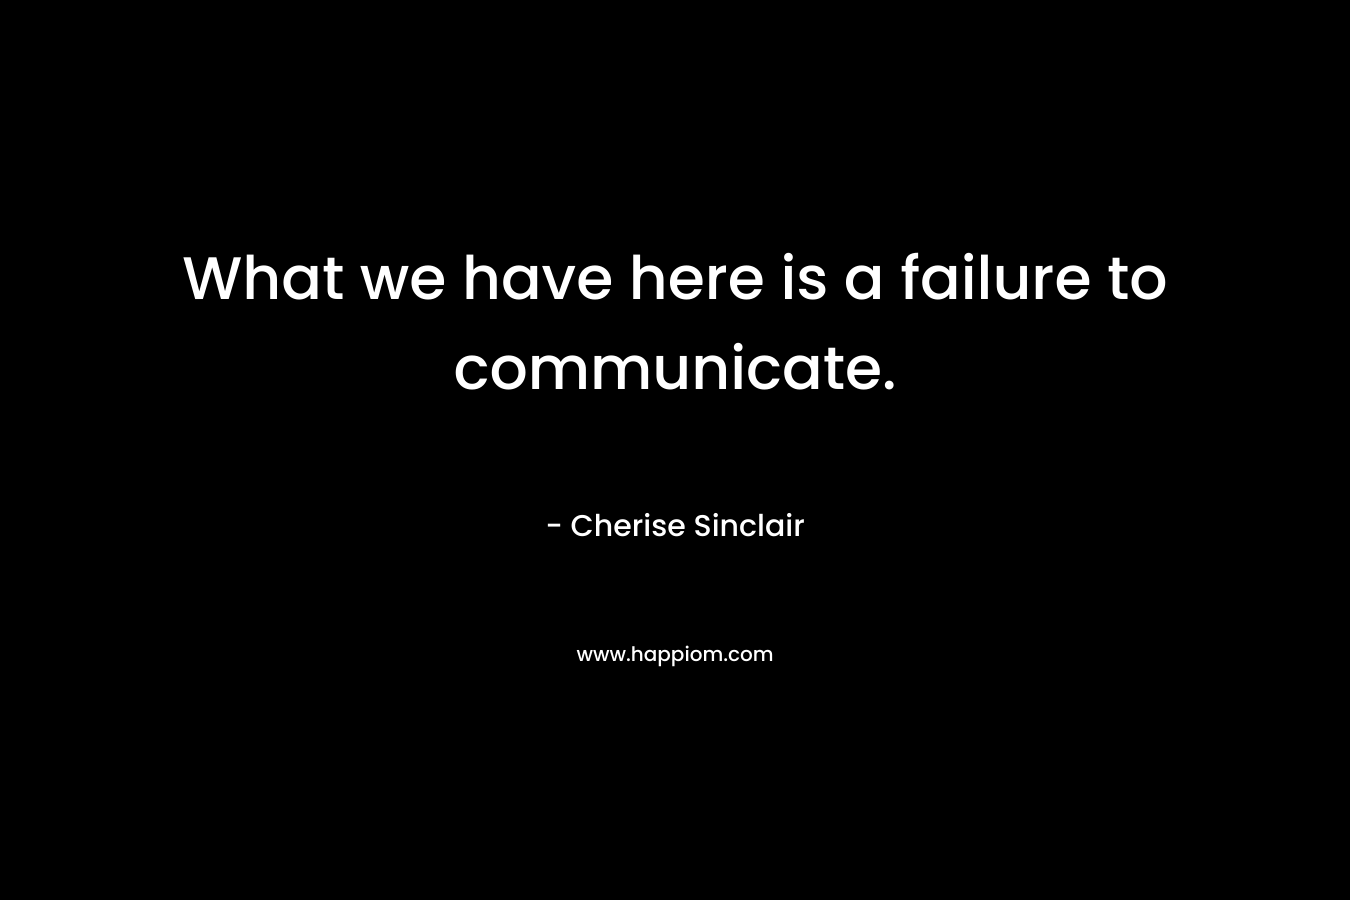 What we have here is a failure to communicate. – Cherise Sinclair